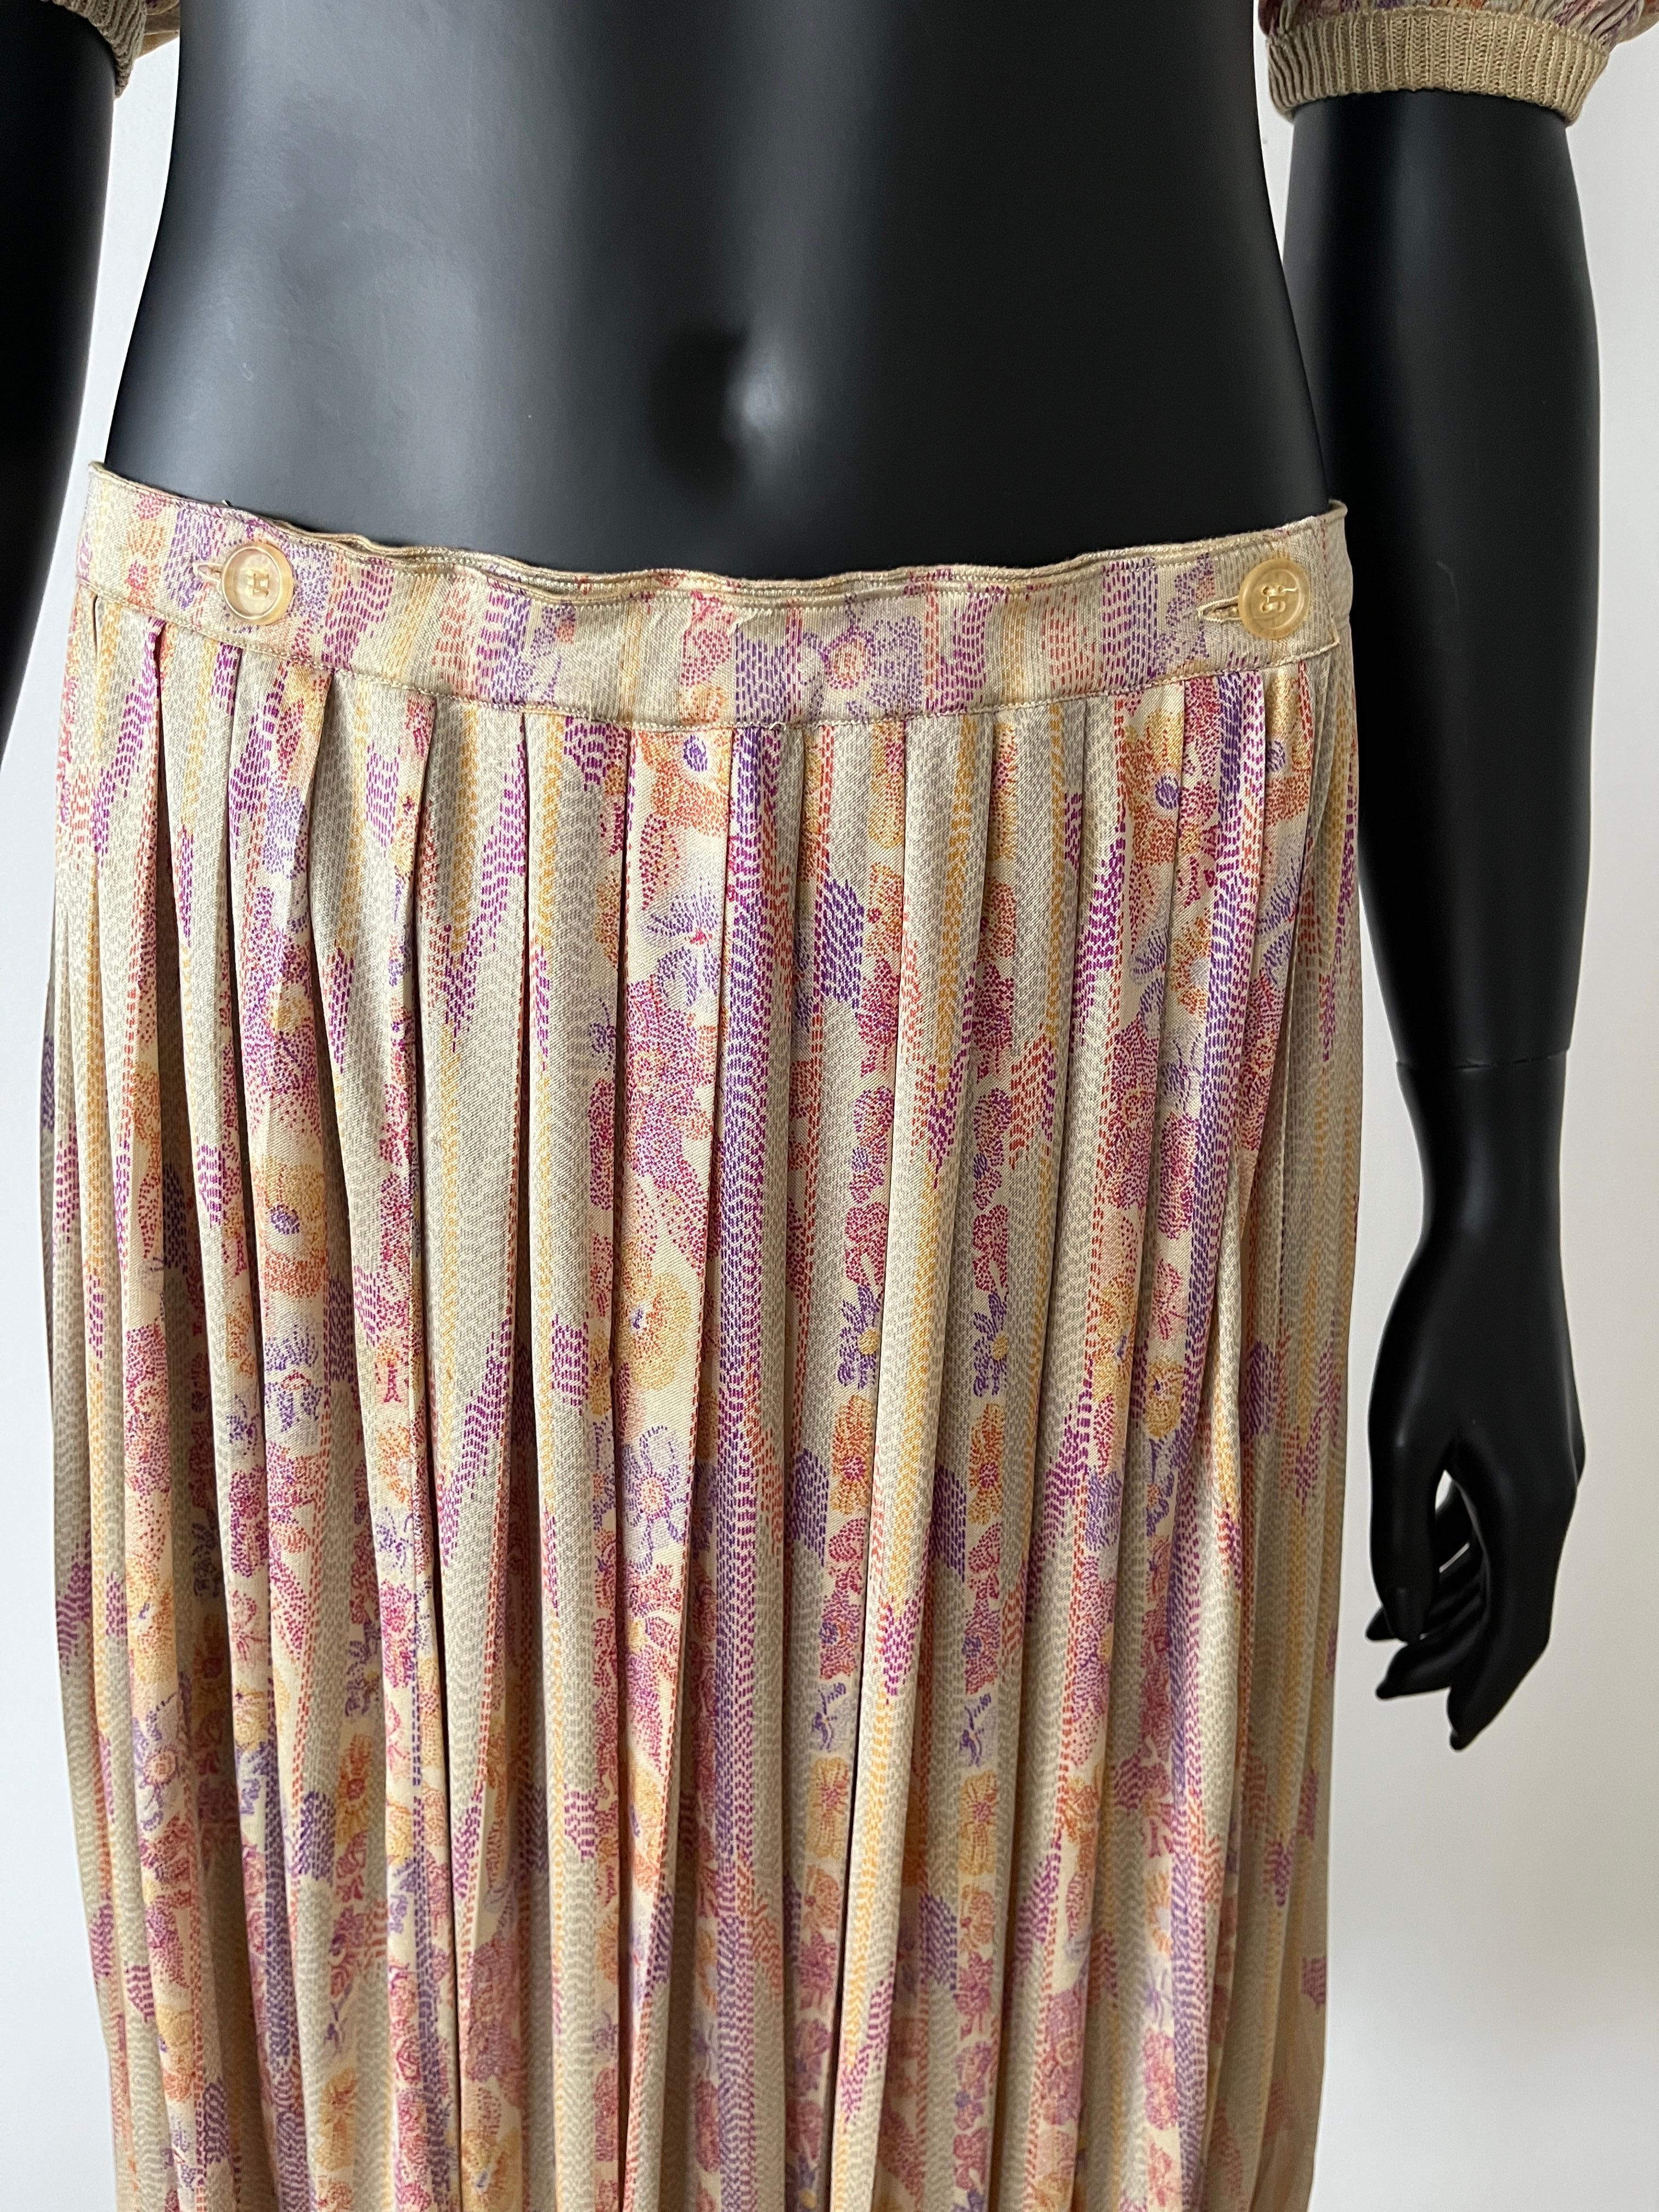 Women's 1980s Rare Vintage MISSONI FLORAL SILK skirt. Top is Sold! For Sale